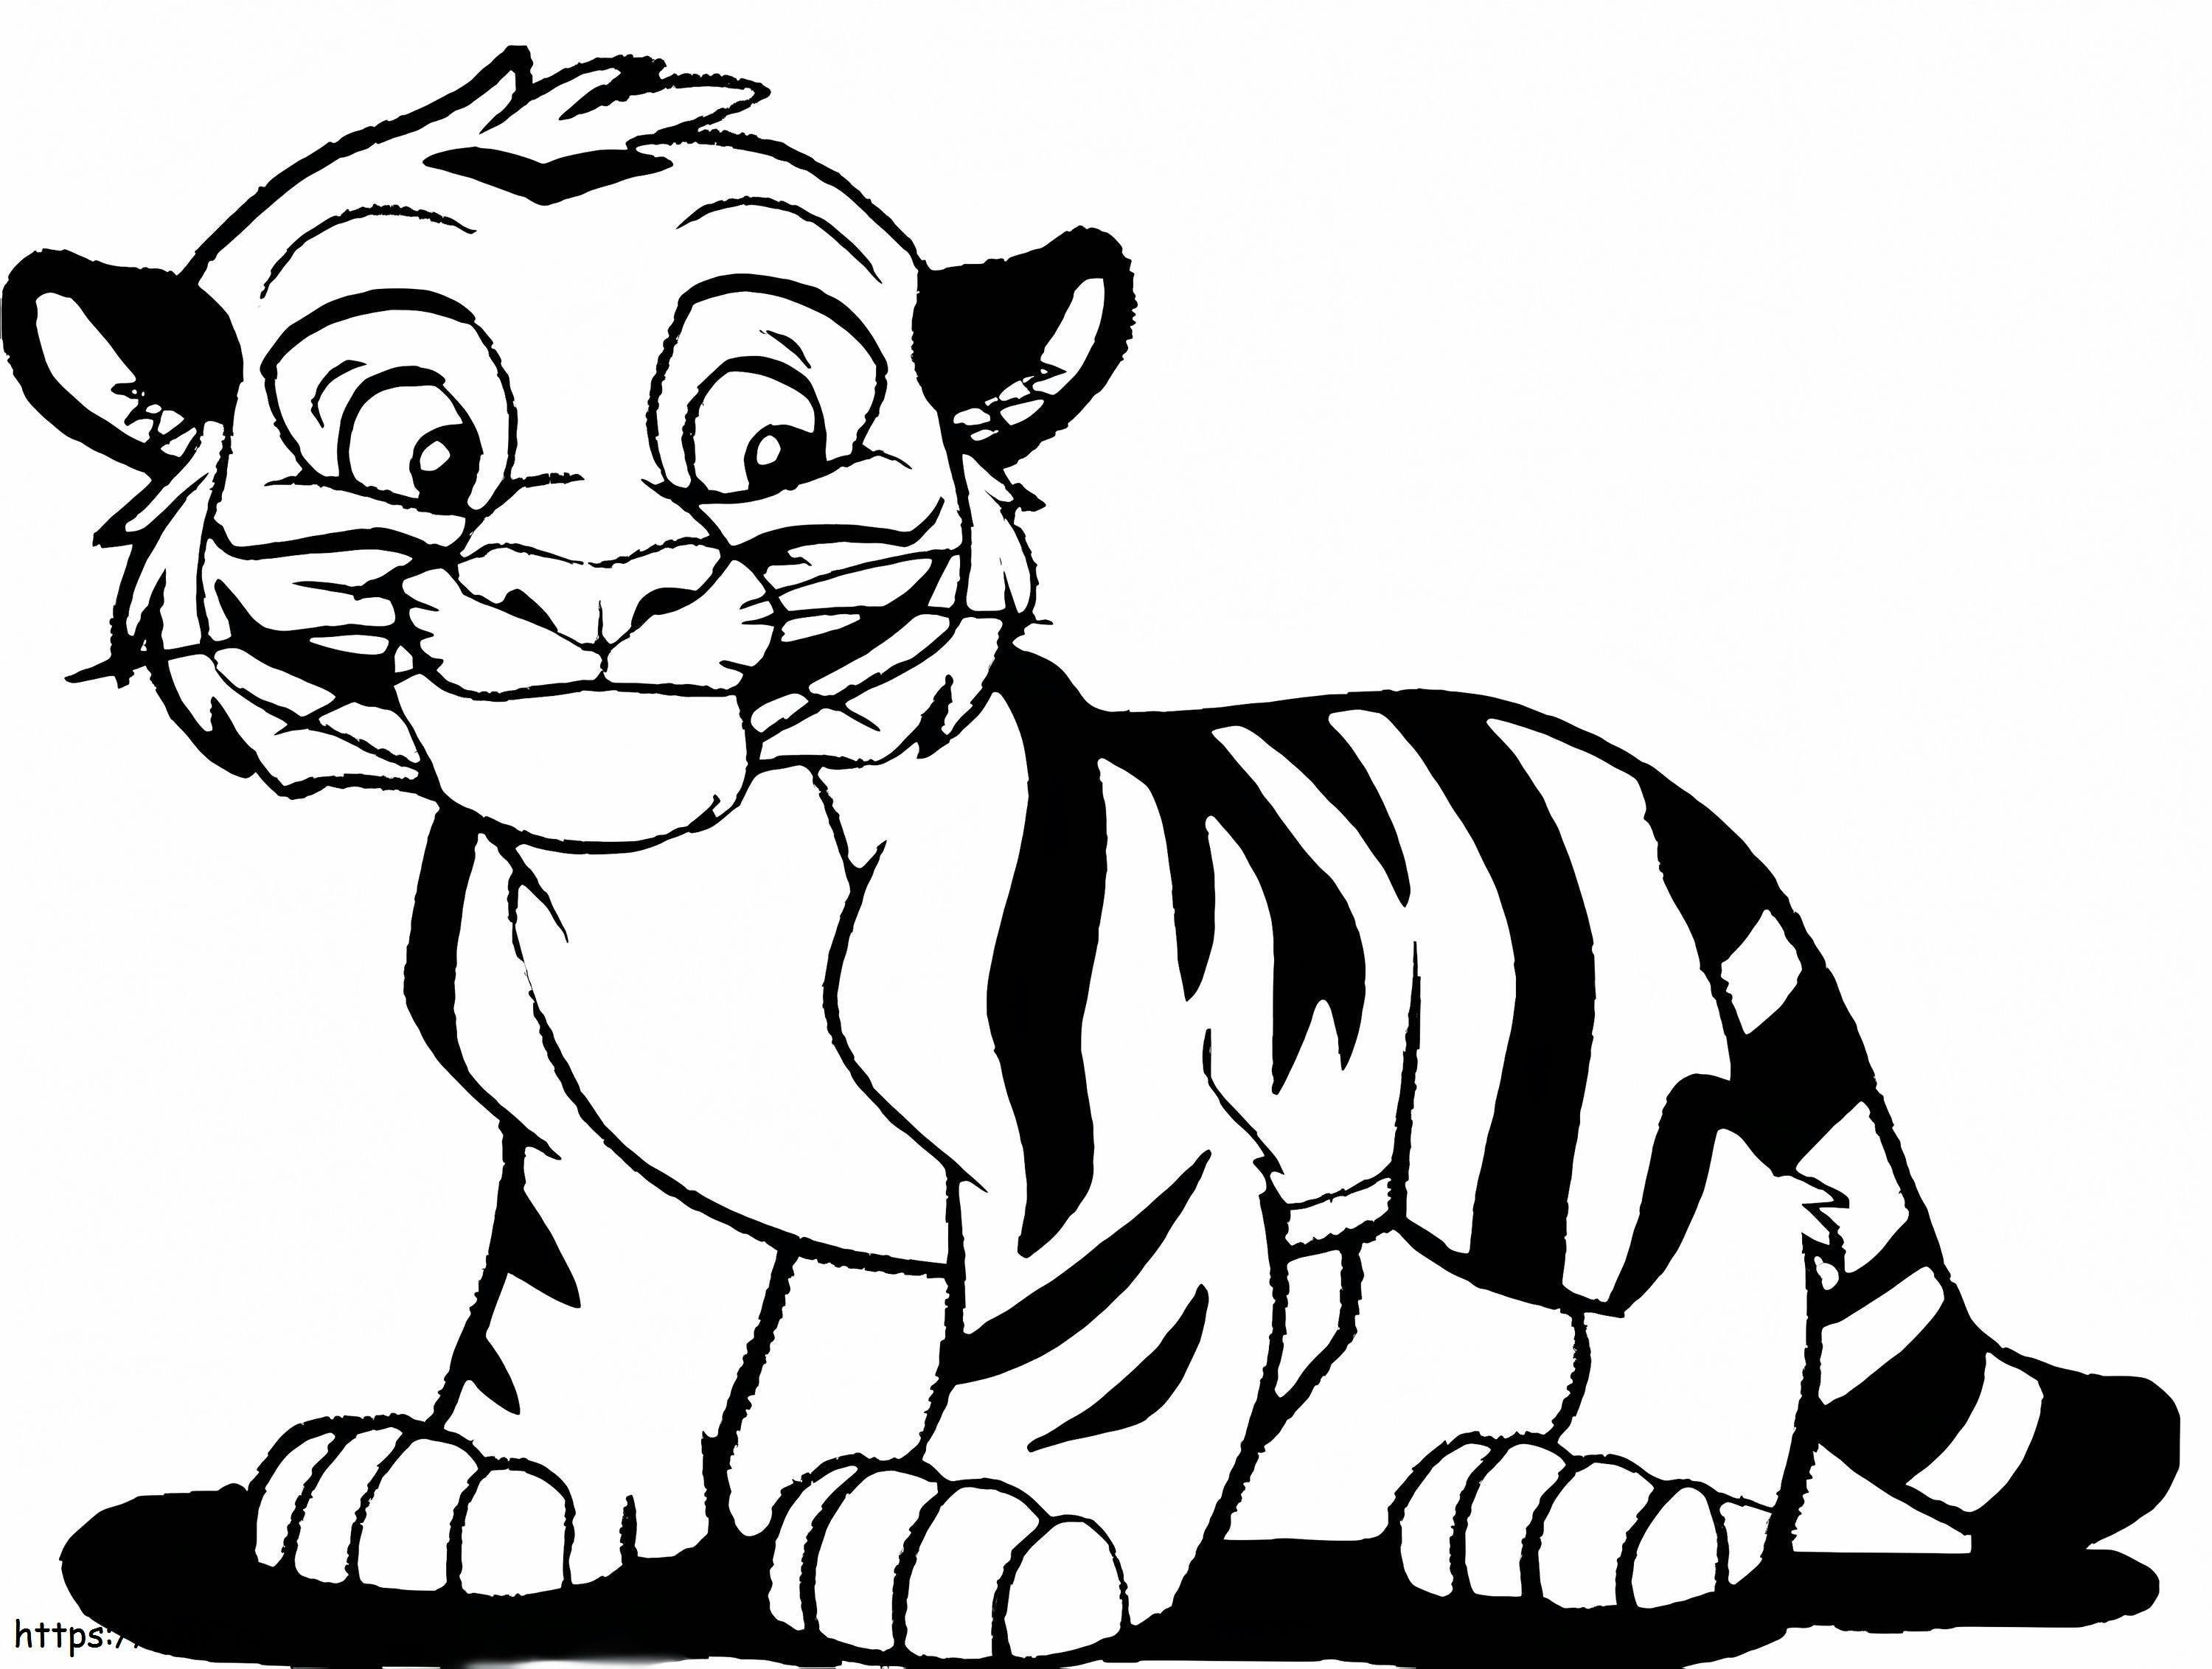 Little Smiling Tiger coloring page